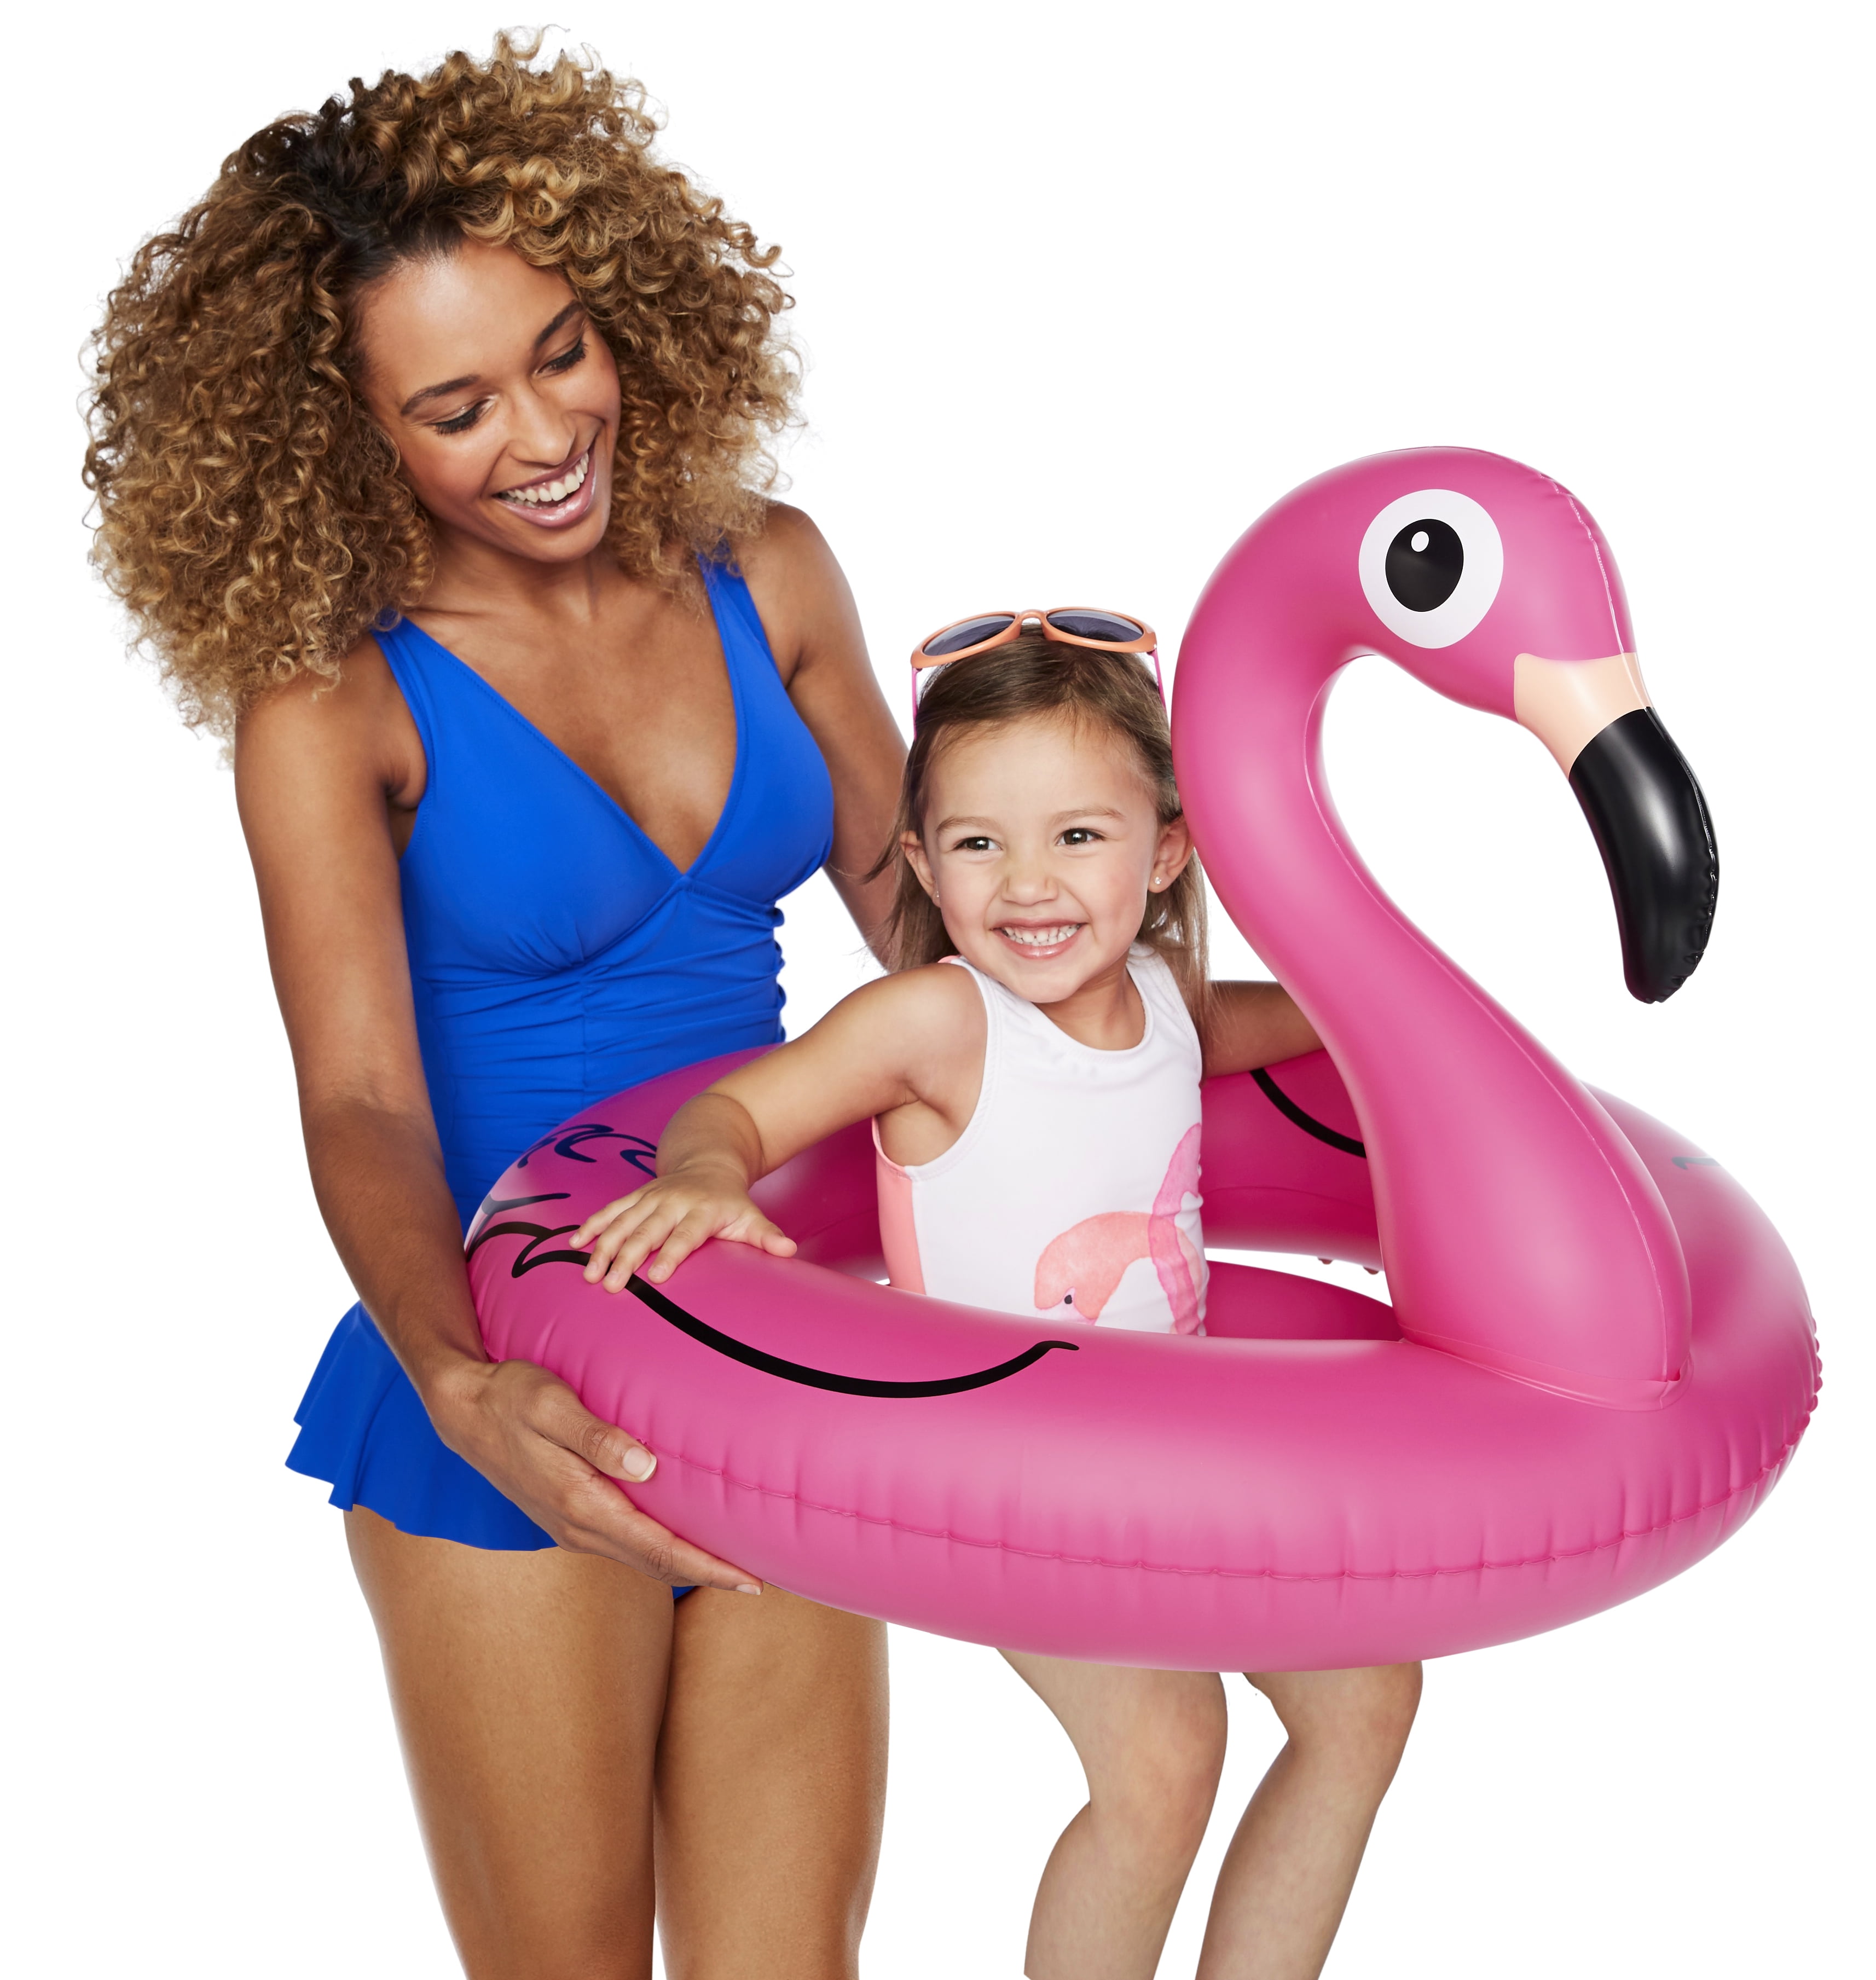 Details about   NEW Bigmouth Nibbles The Shark Lil’ Canopy Pool Float Raft Up To 40 Lbs 12-36 Mo